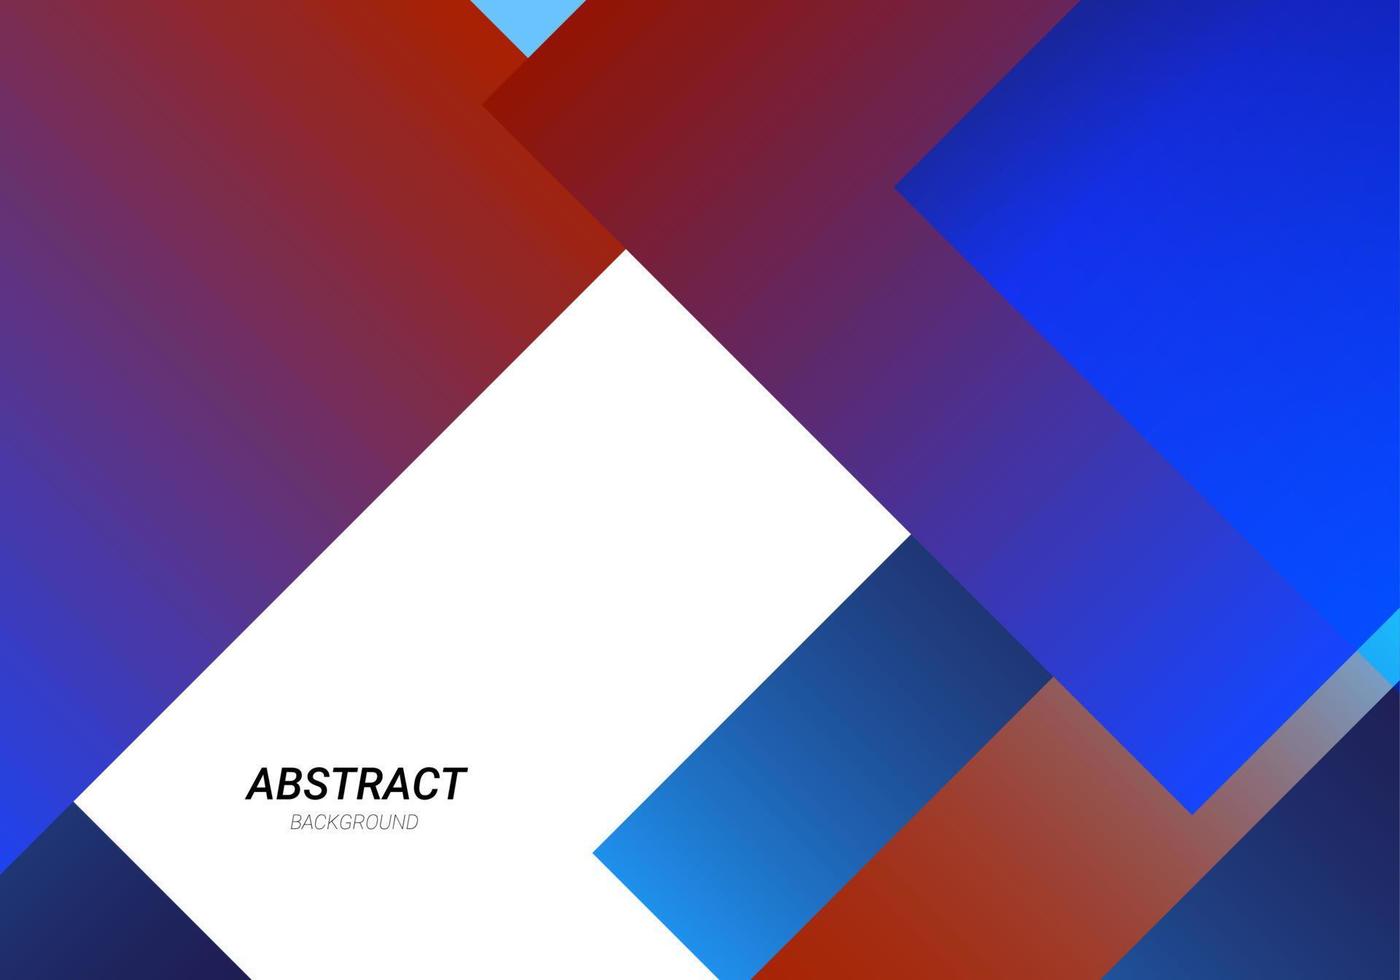 Abstract geometric decorative blue and red color design colorful background vector